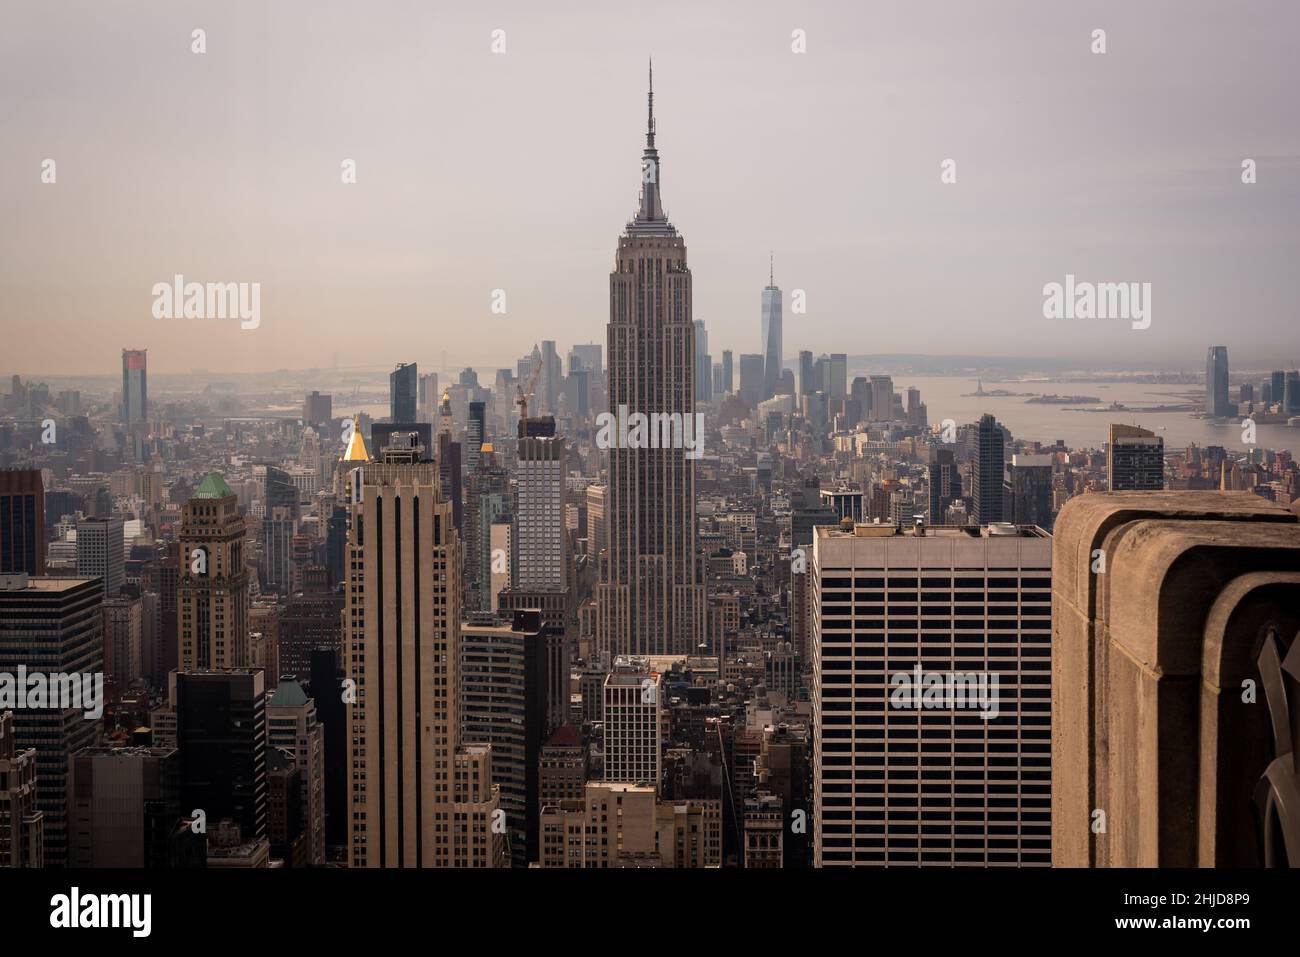 Landscape of New York with the Empire State Building, NYC Stock Photo